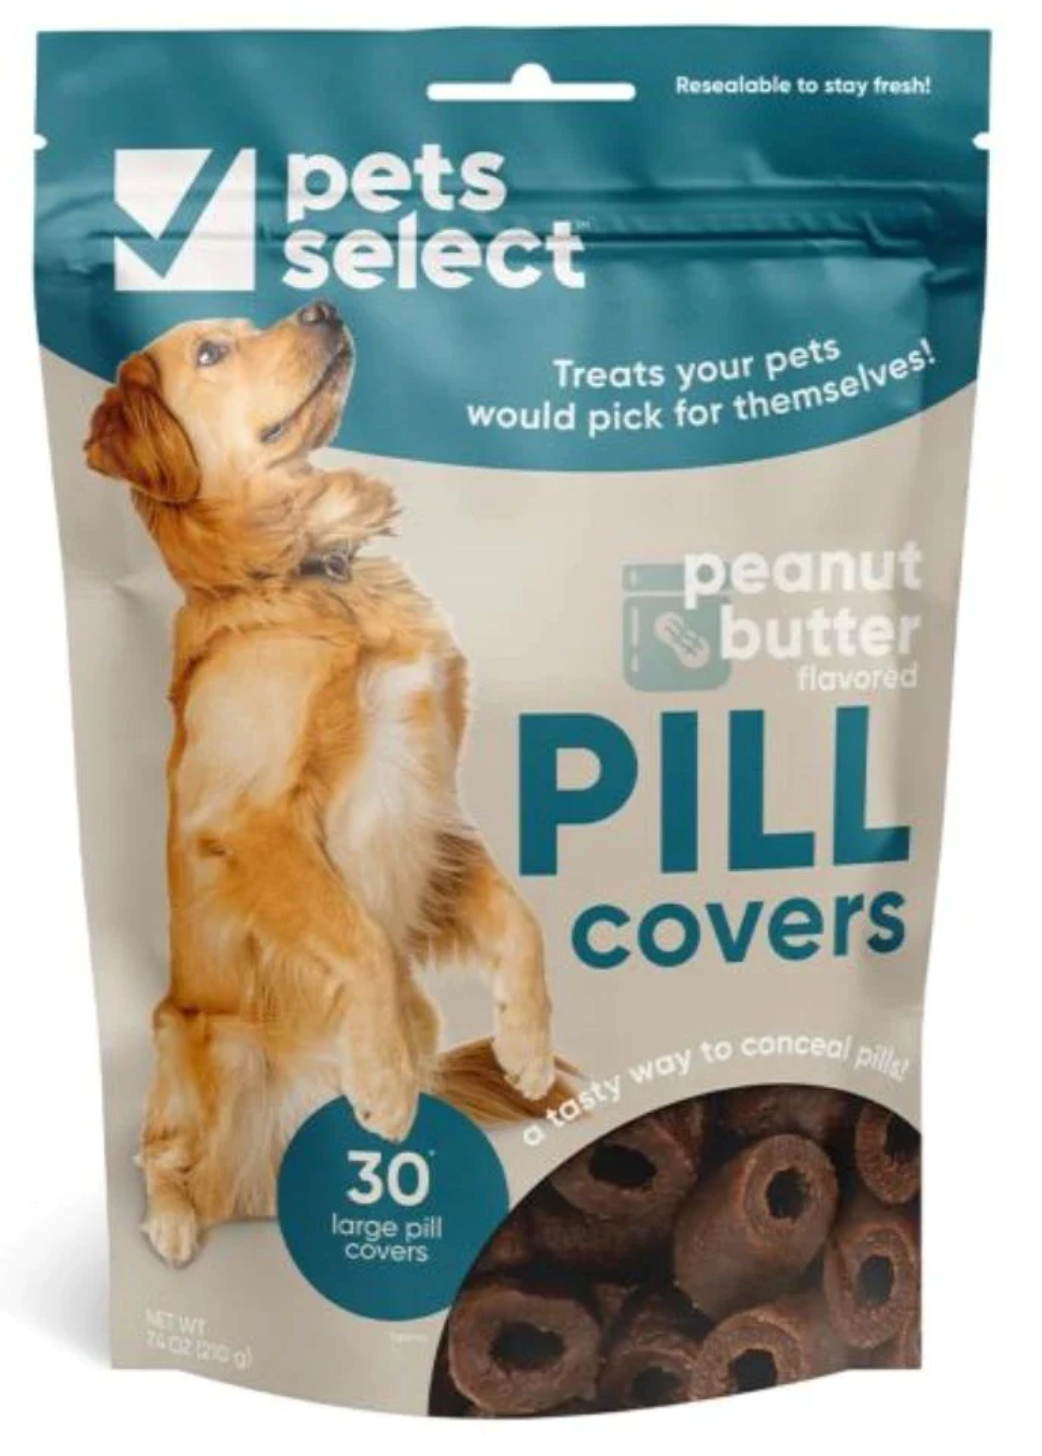 PILL COVERS